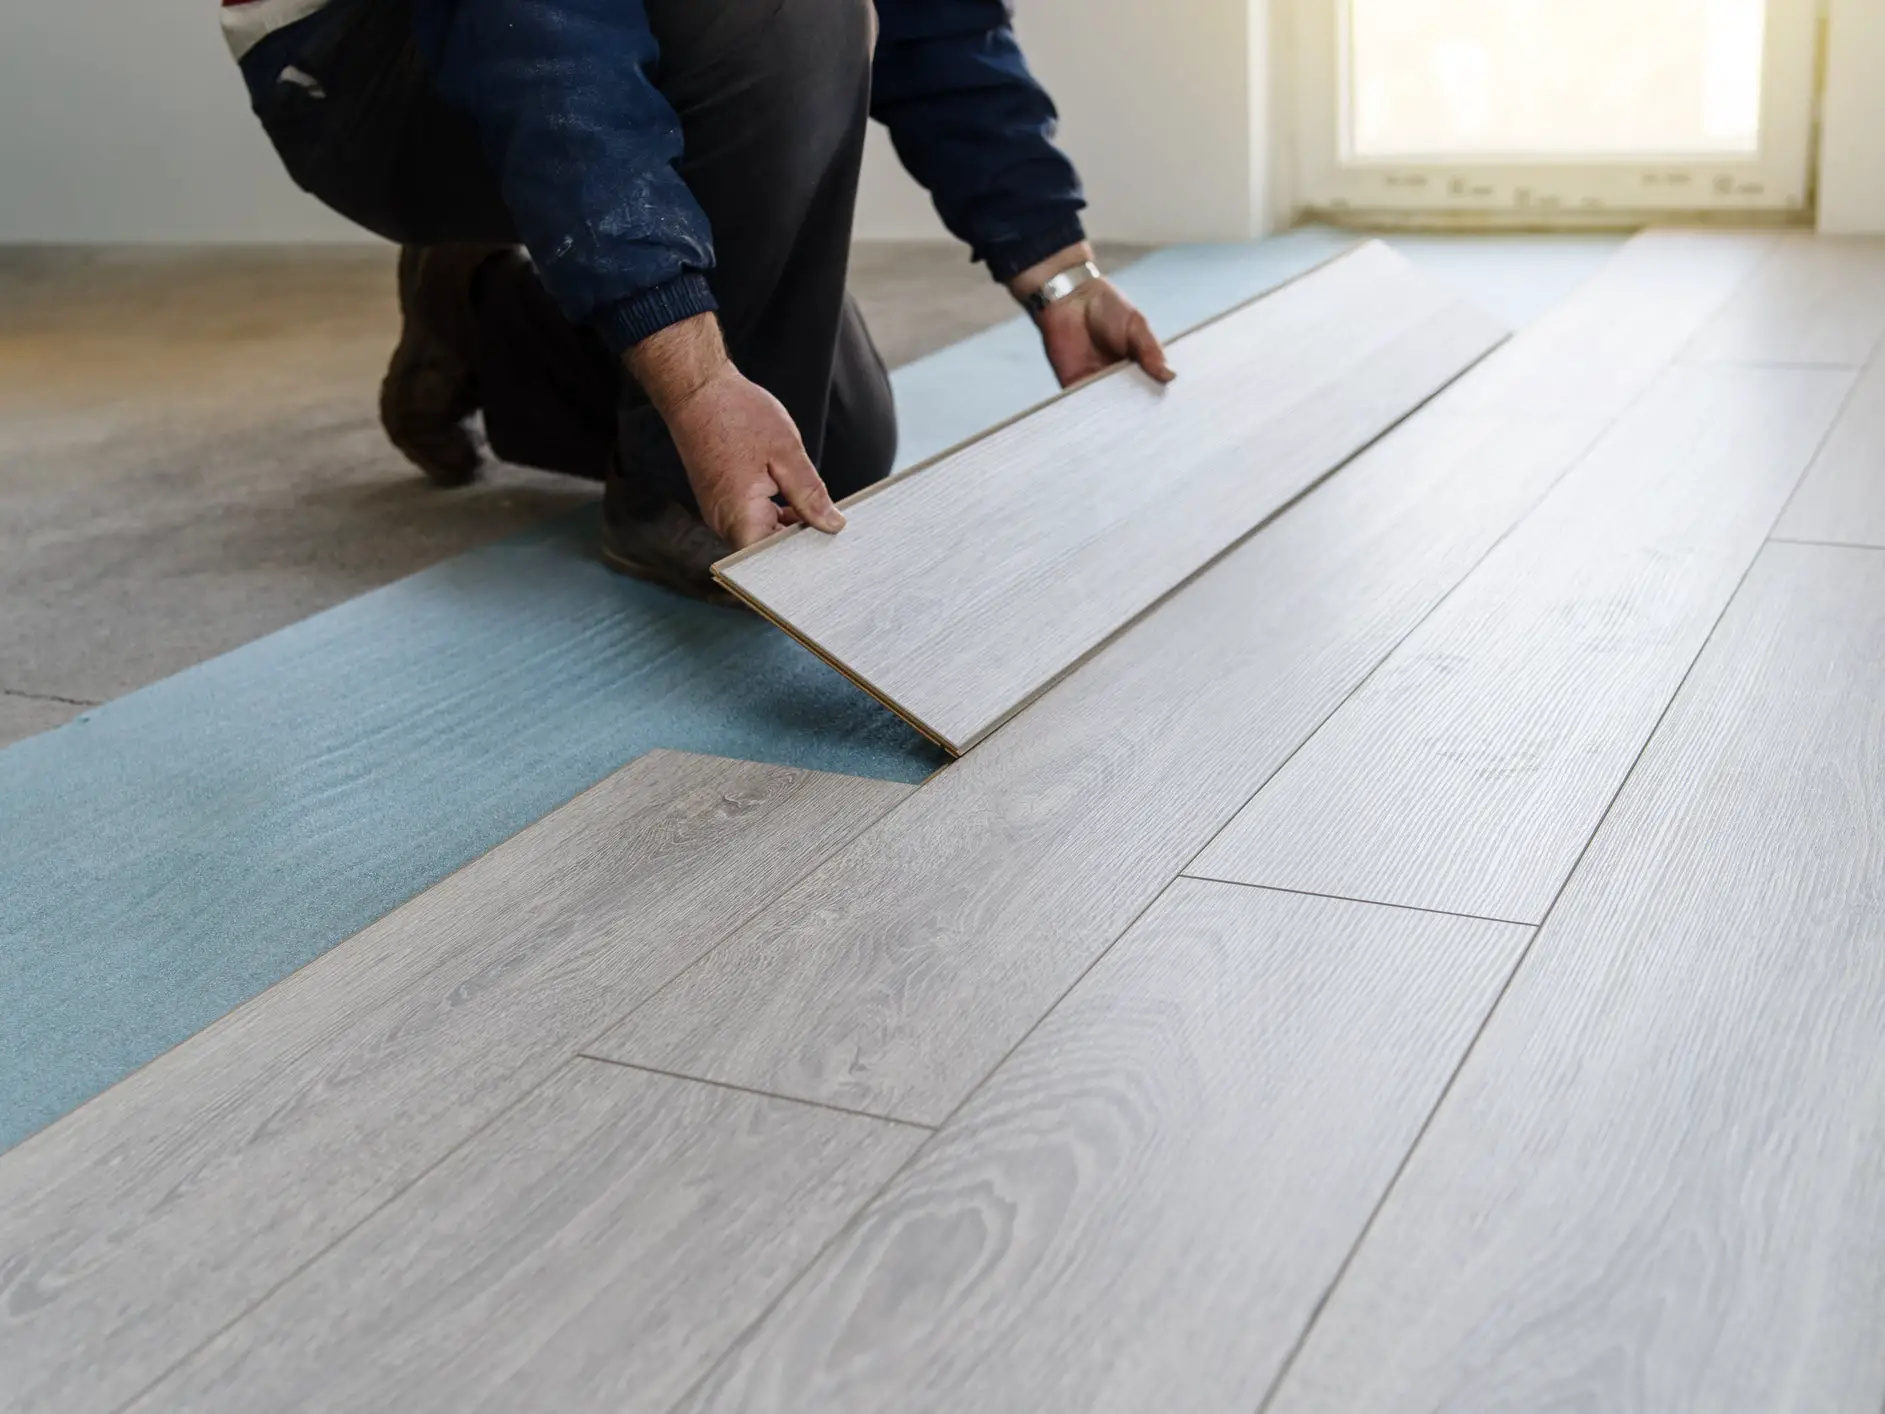 How To Install Temporary Flooring Over, Can You Lay Laminate Flooring Over Carpet